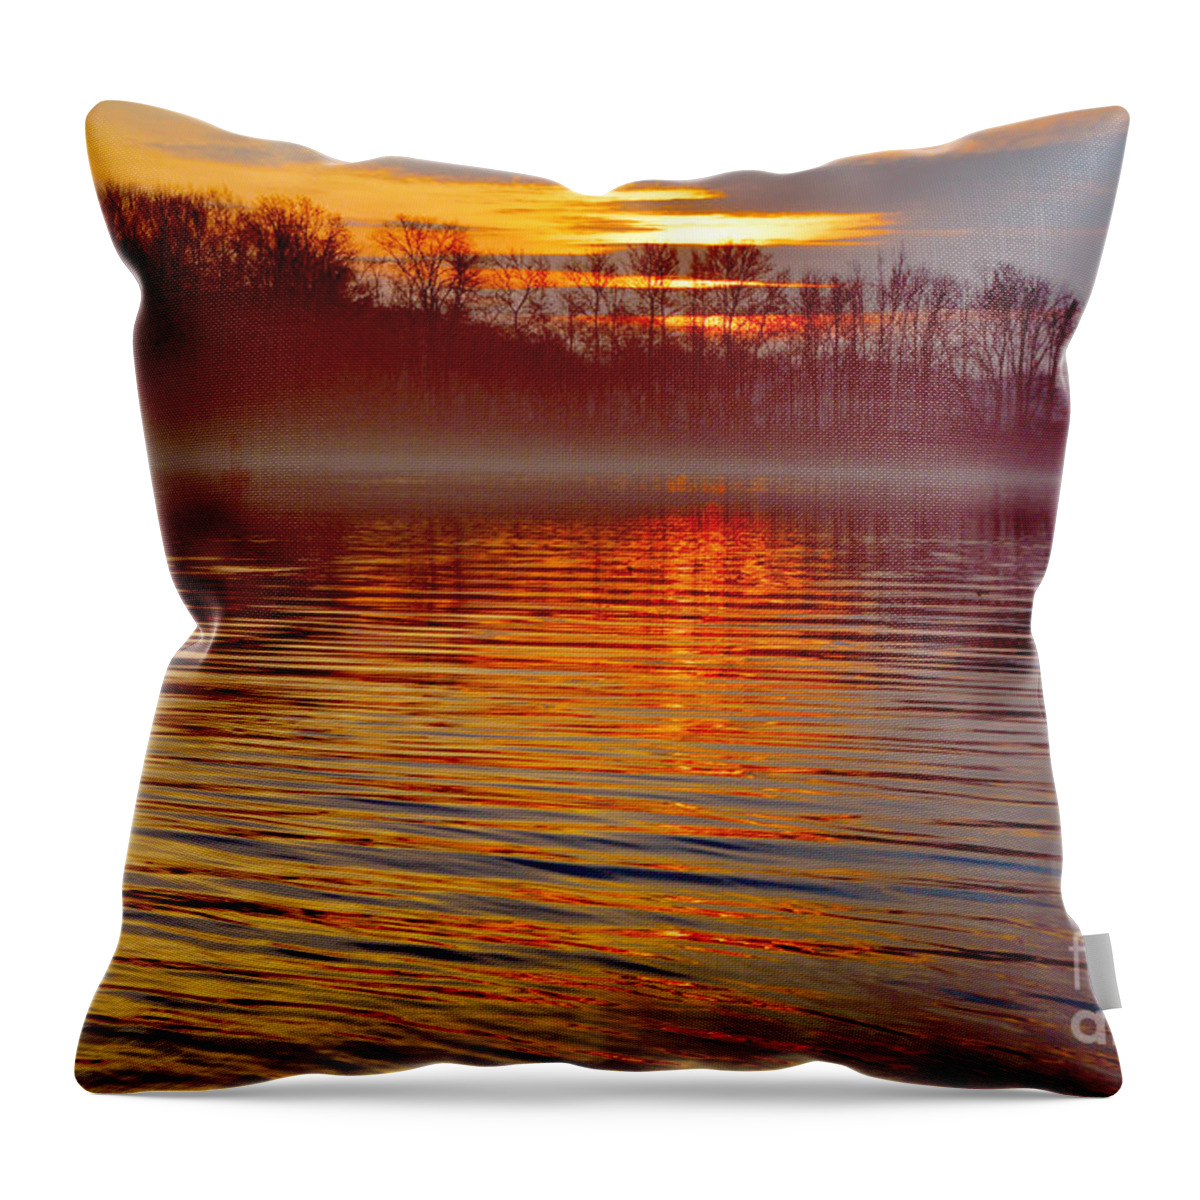 Foggy Throw Pillow featuring the photograph Foggy Sunrise At The Delaware River by Robyn King